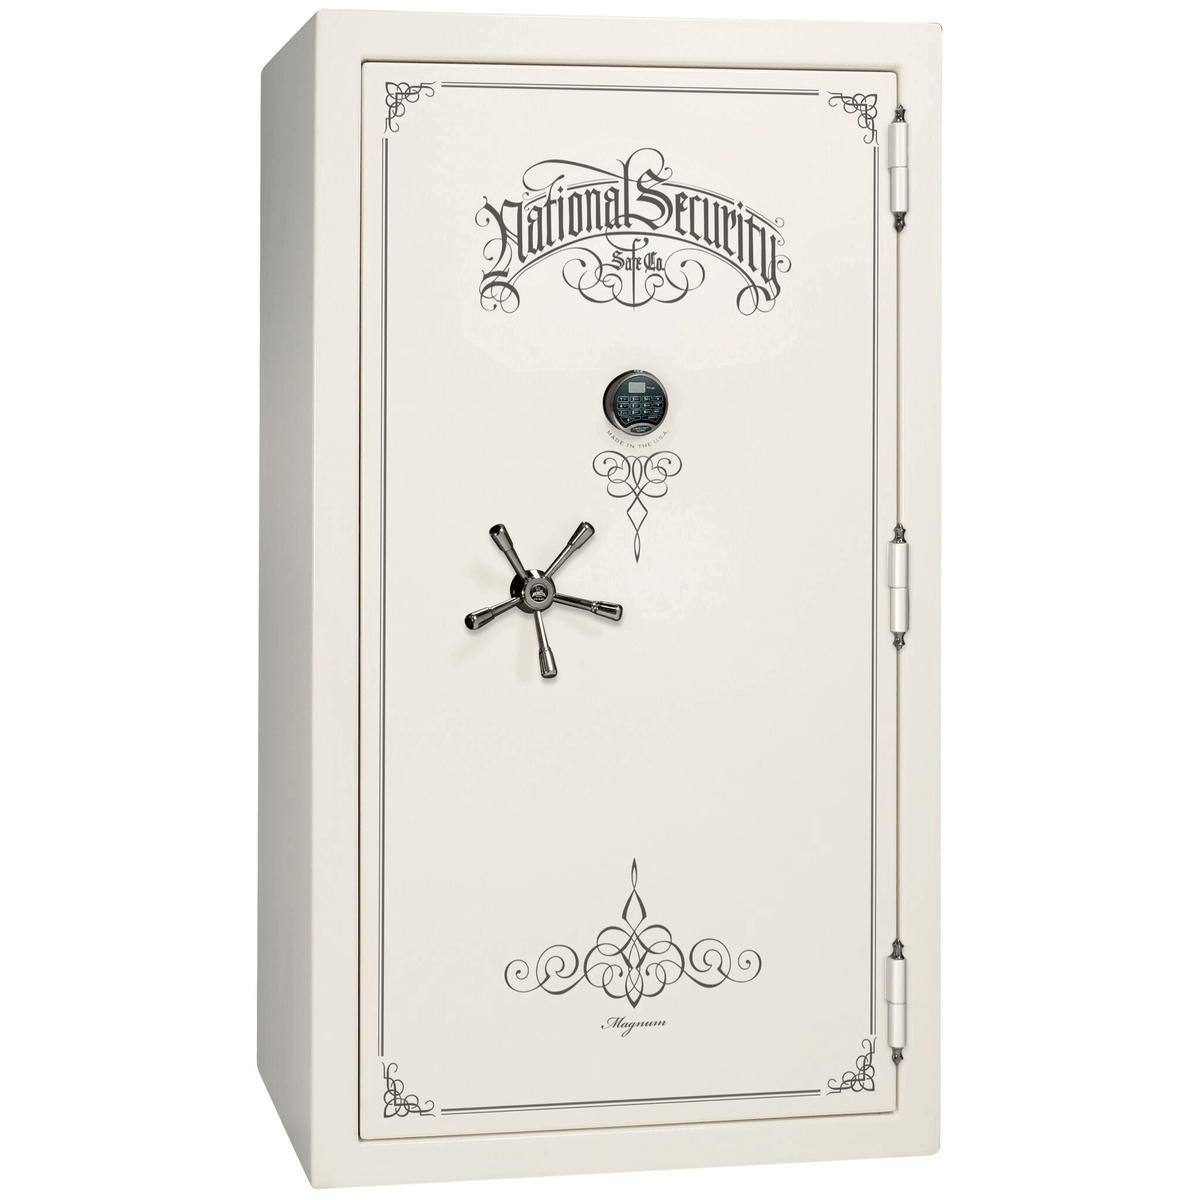 Liberty Safe National Magnum 50 in White Gloss with Black Chrome Electronic Lock, closed door.